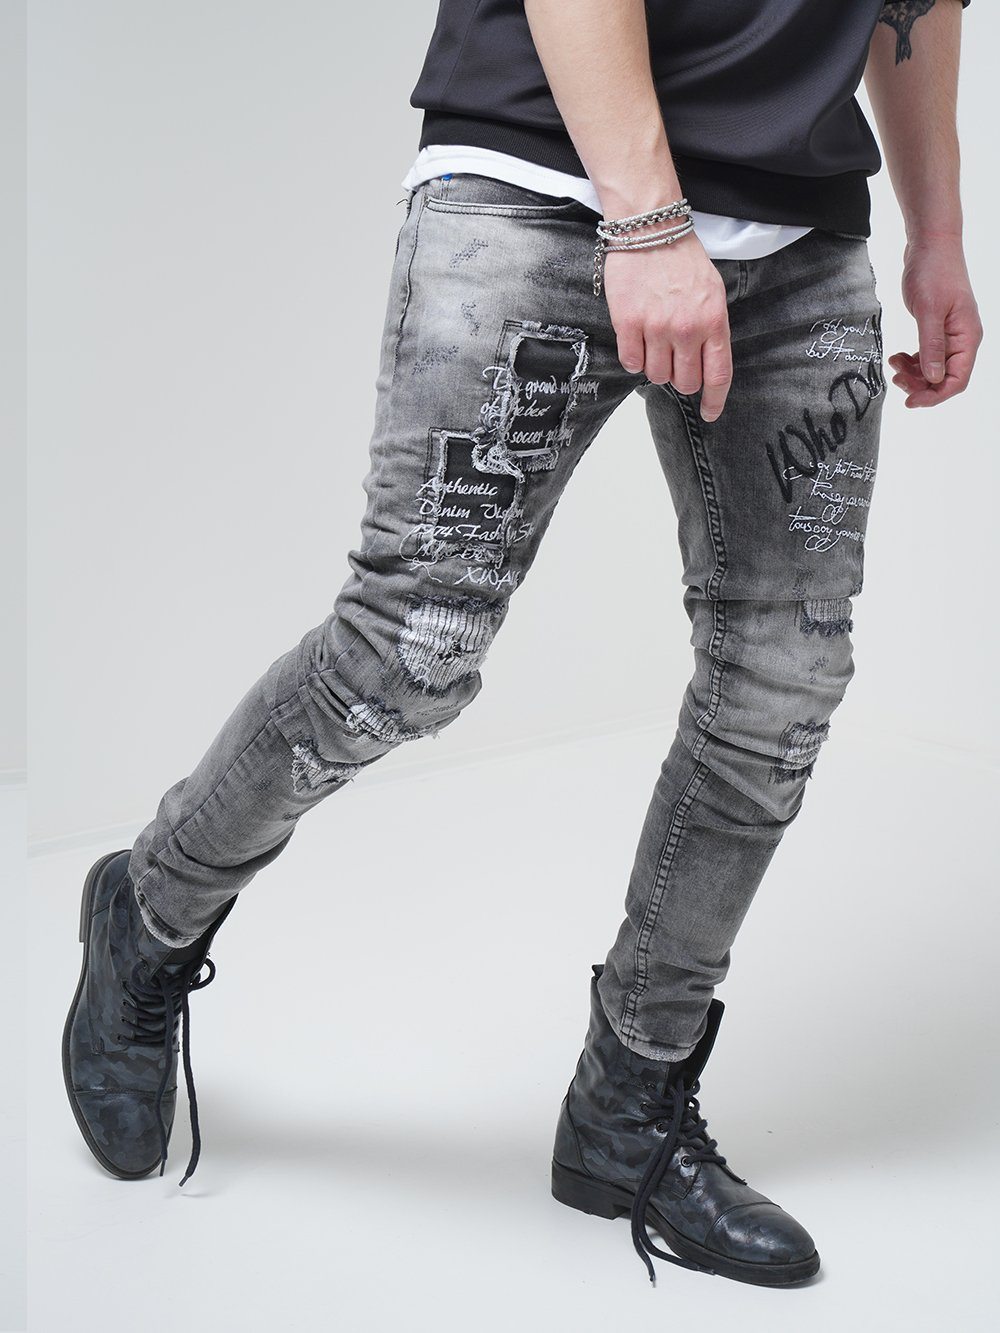 A man wearing LONDON skinny fit ripped jeans.